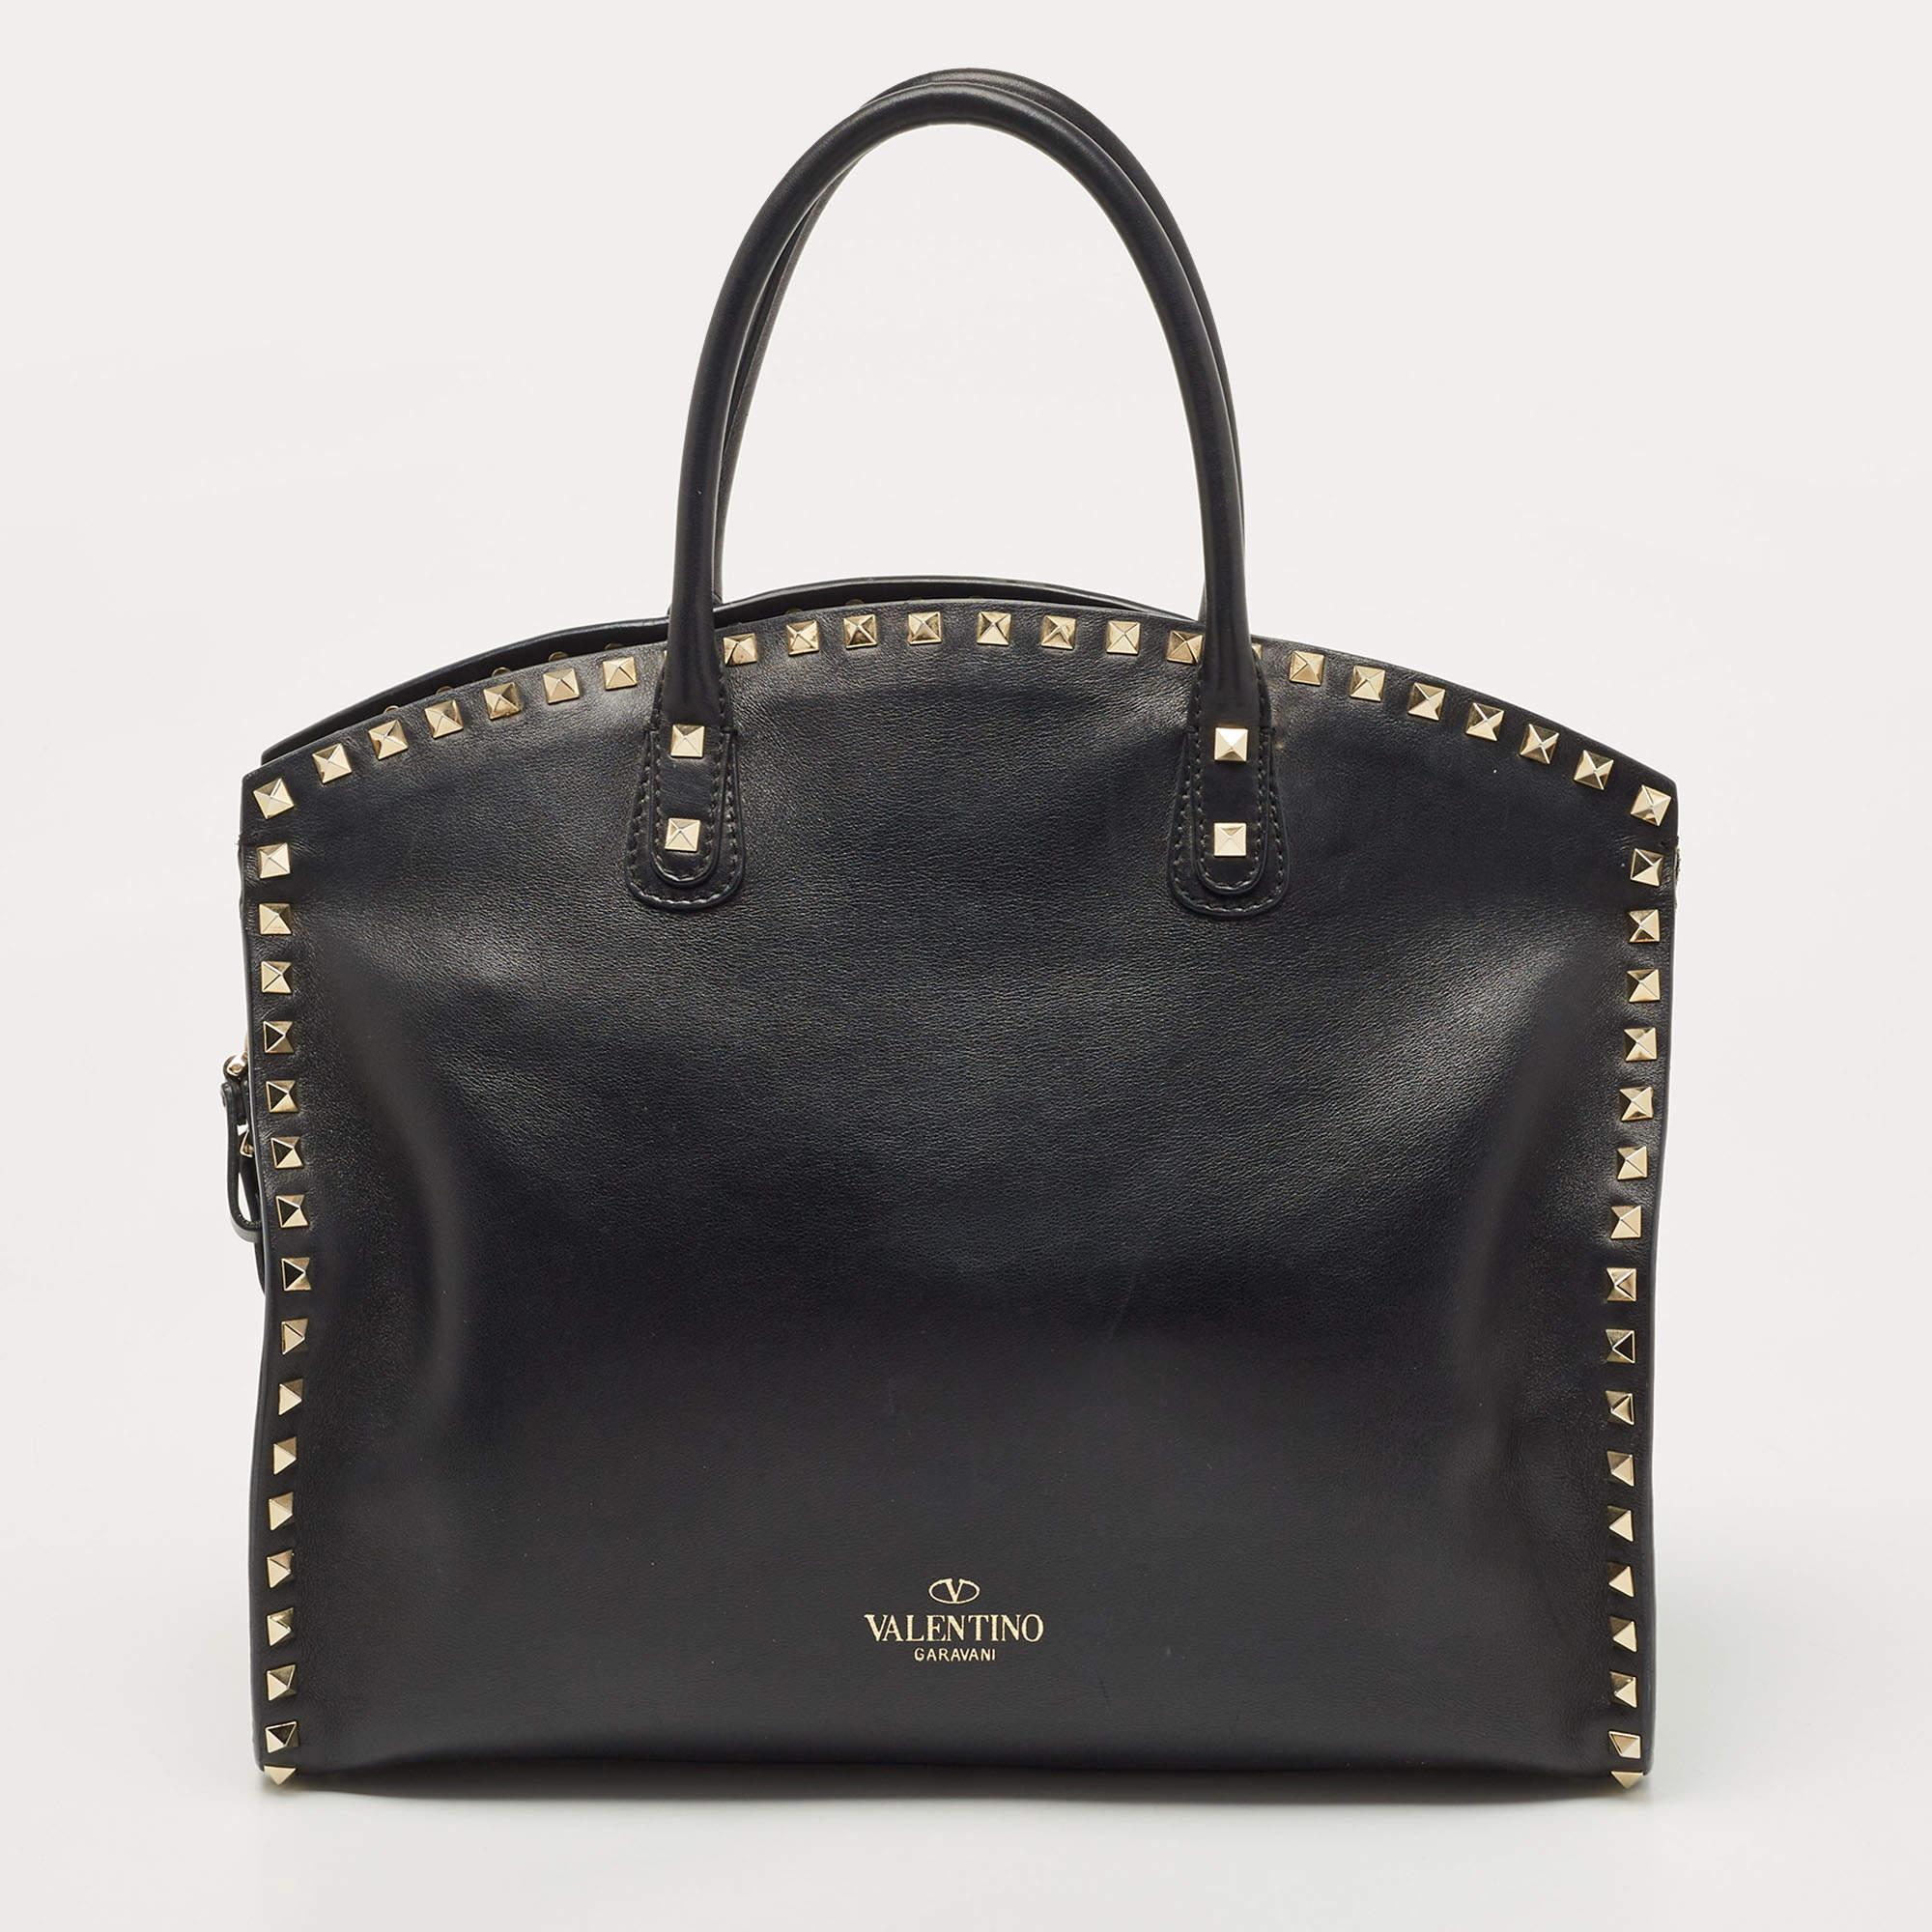 Rock chic and fab, this bag by Valentino means business. Made from black leather in a dome shape, it comes accented with signature Rockstud outlined in gold-tone hardware. It features top rolled handles with an optional shoulder strap. The bottom